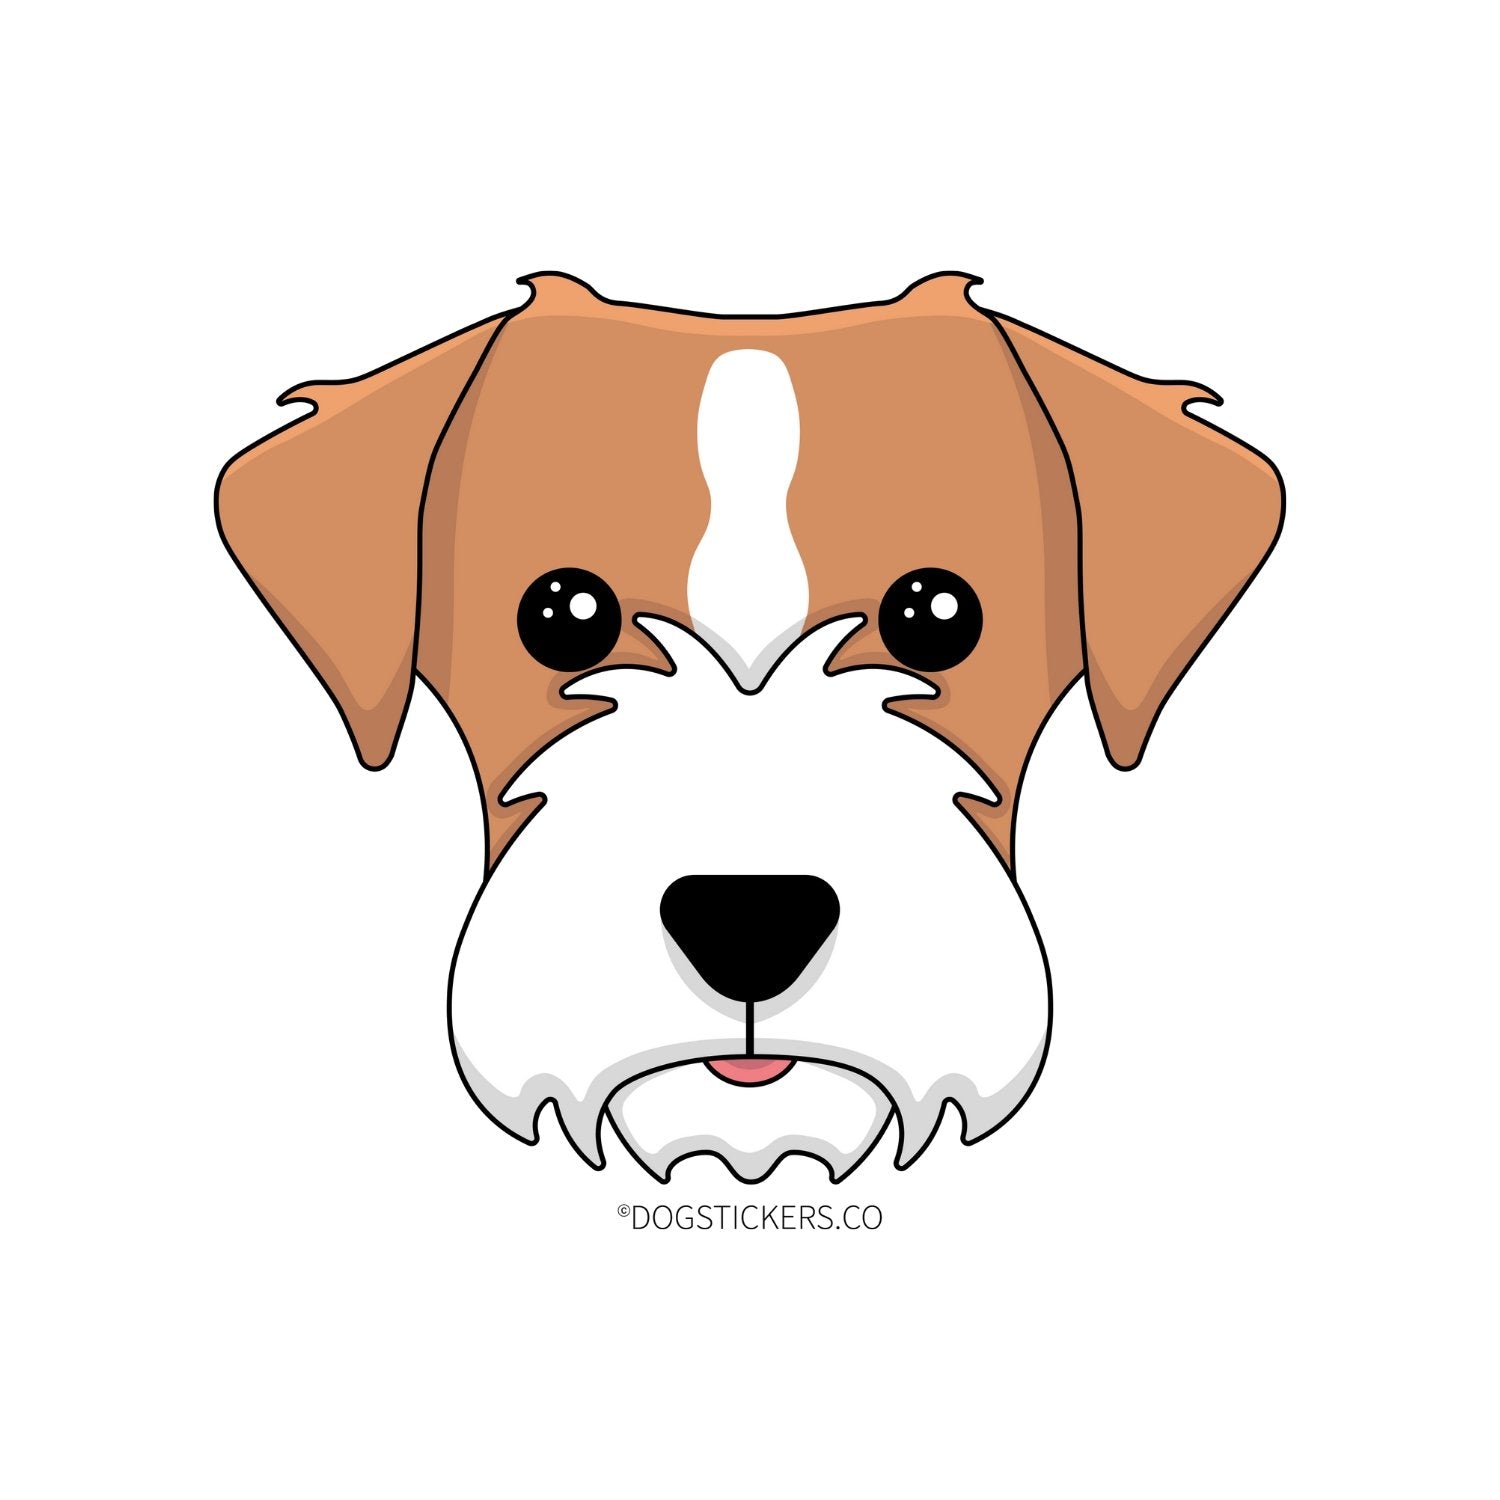 Jack Russell Terrier Dog Sticker - Dogstickers.co